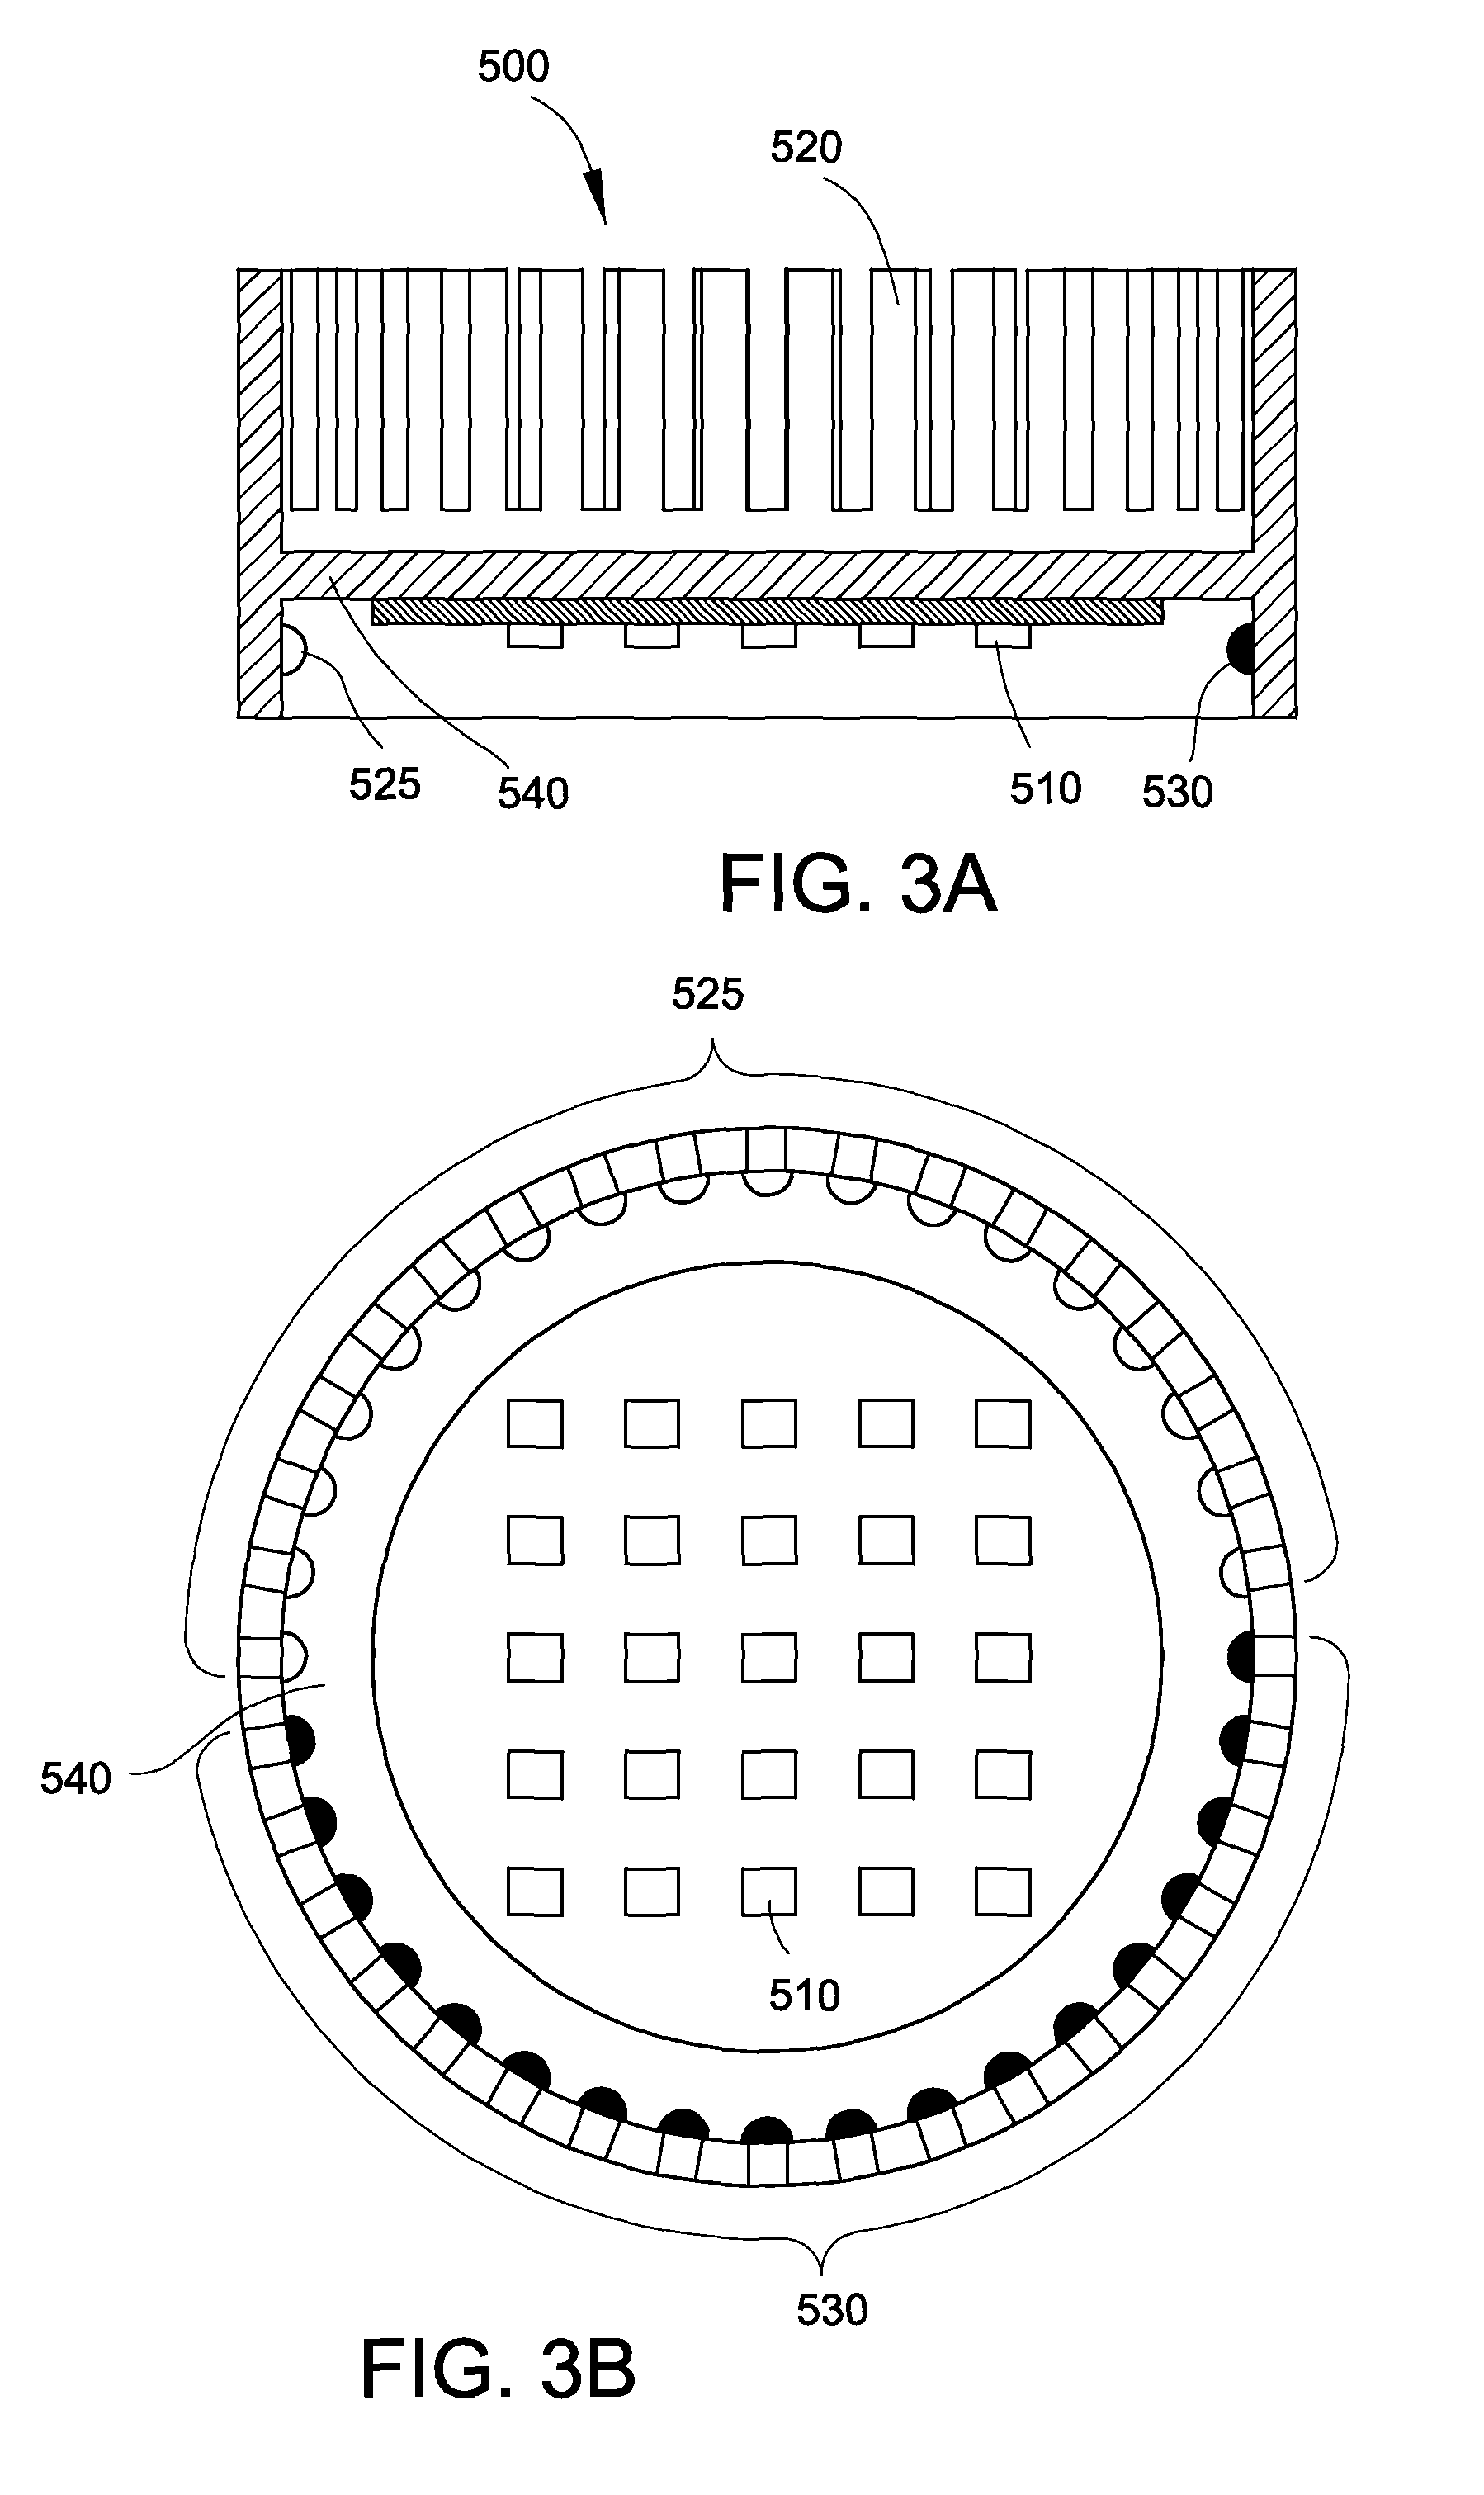 Solid-state lighting device